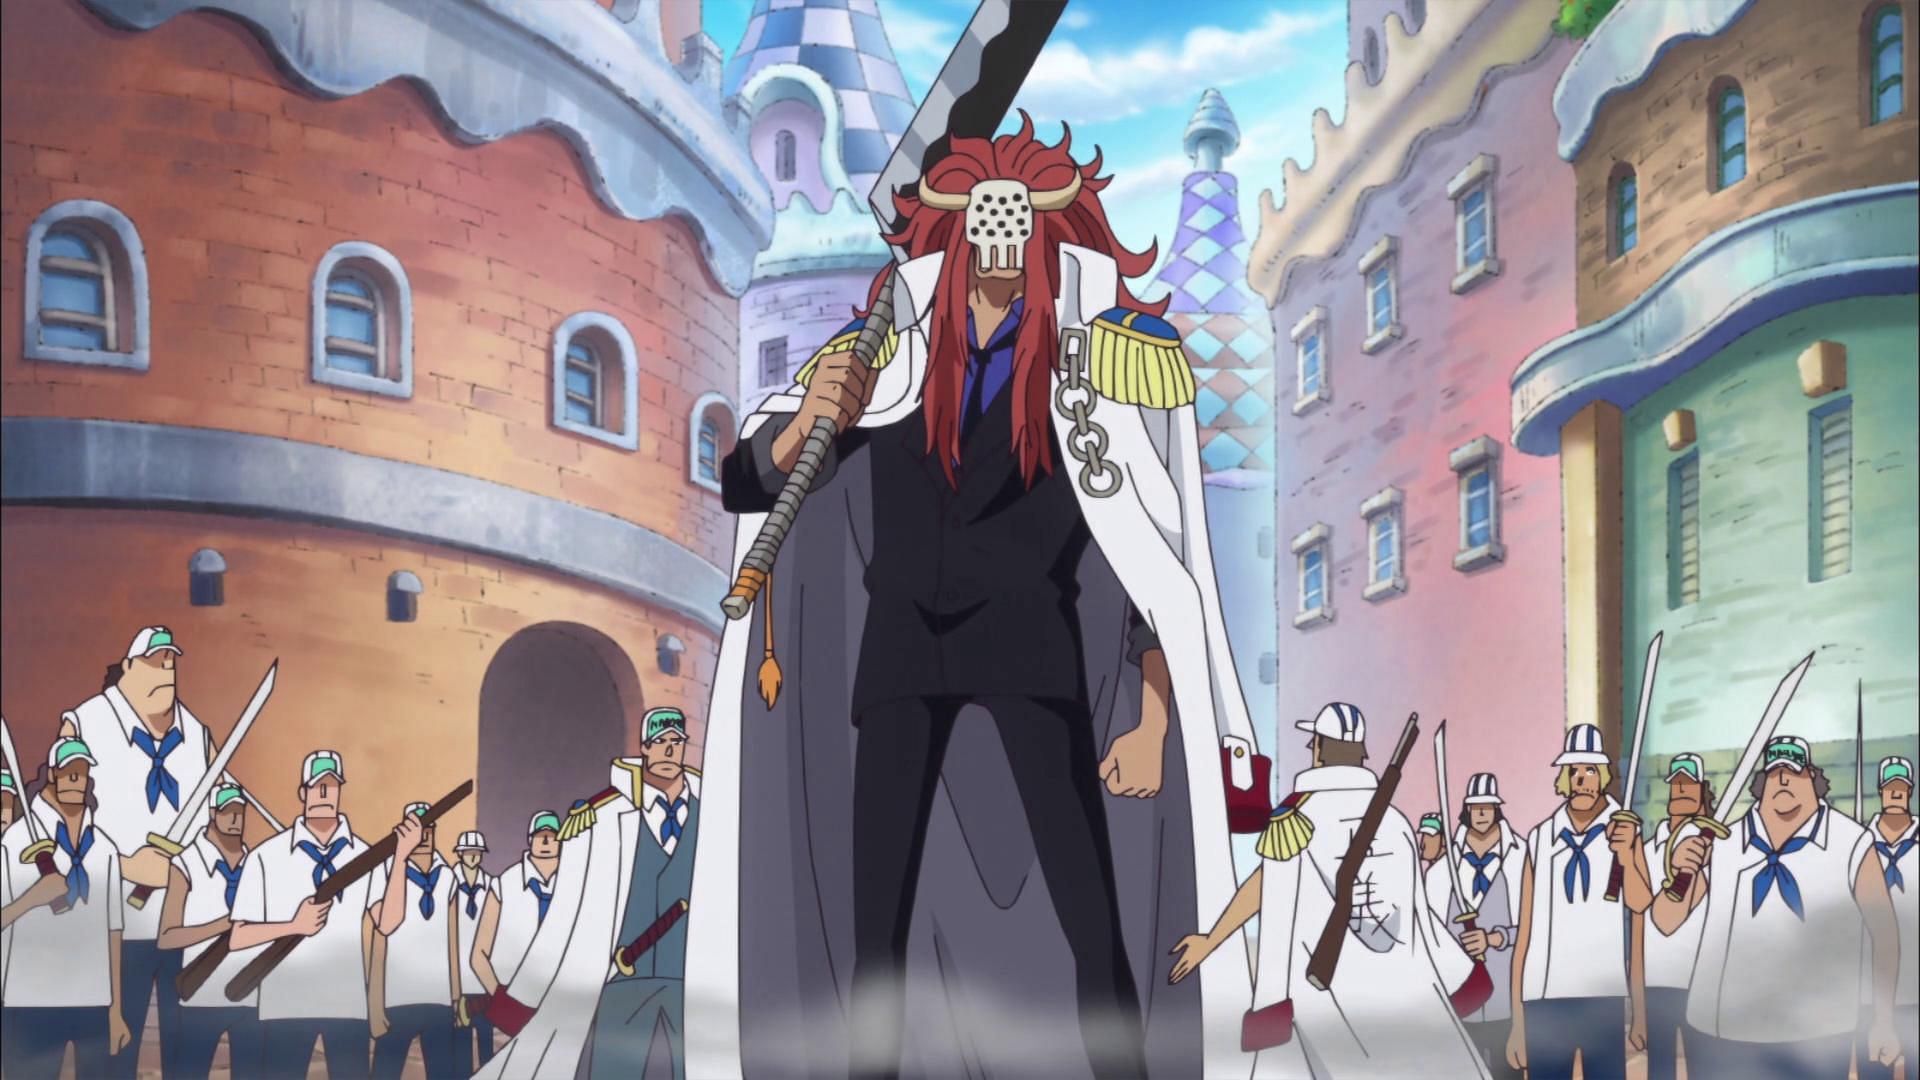 Bastille as seen in the One Piece anime (Image via Toei Animation)